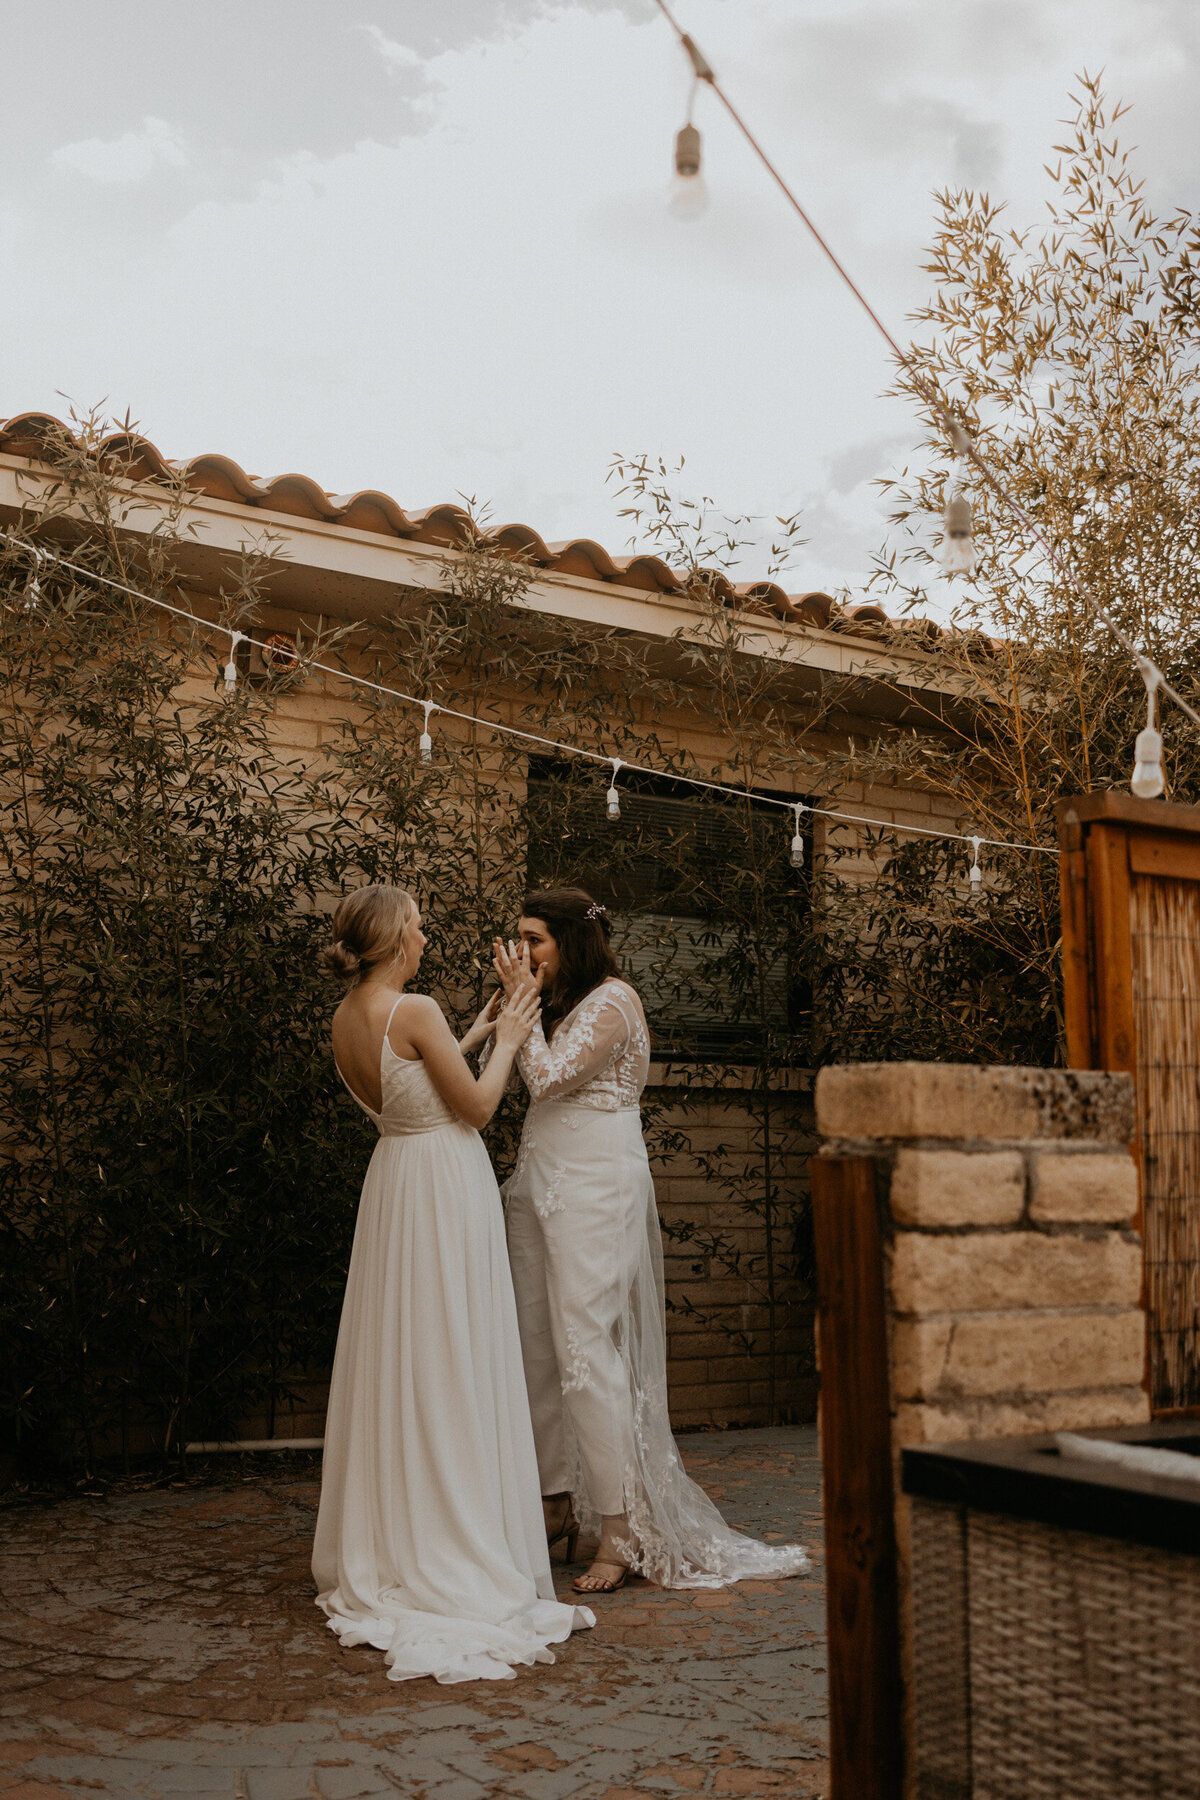 two brides first look before their ceremony, seeing each other for the first time